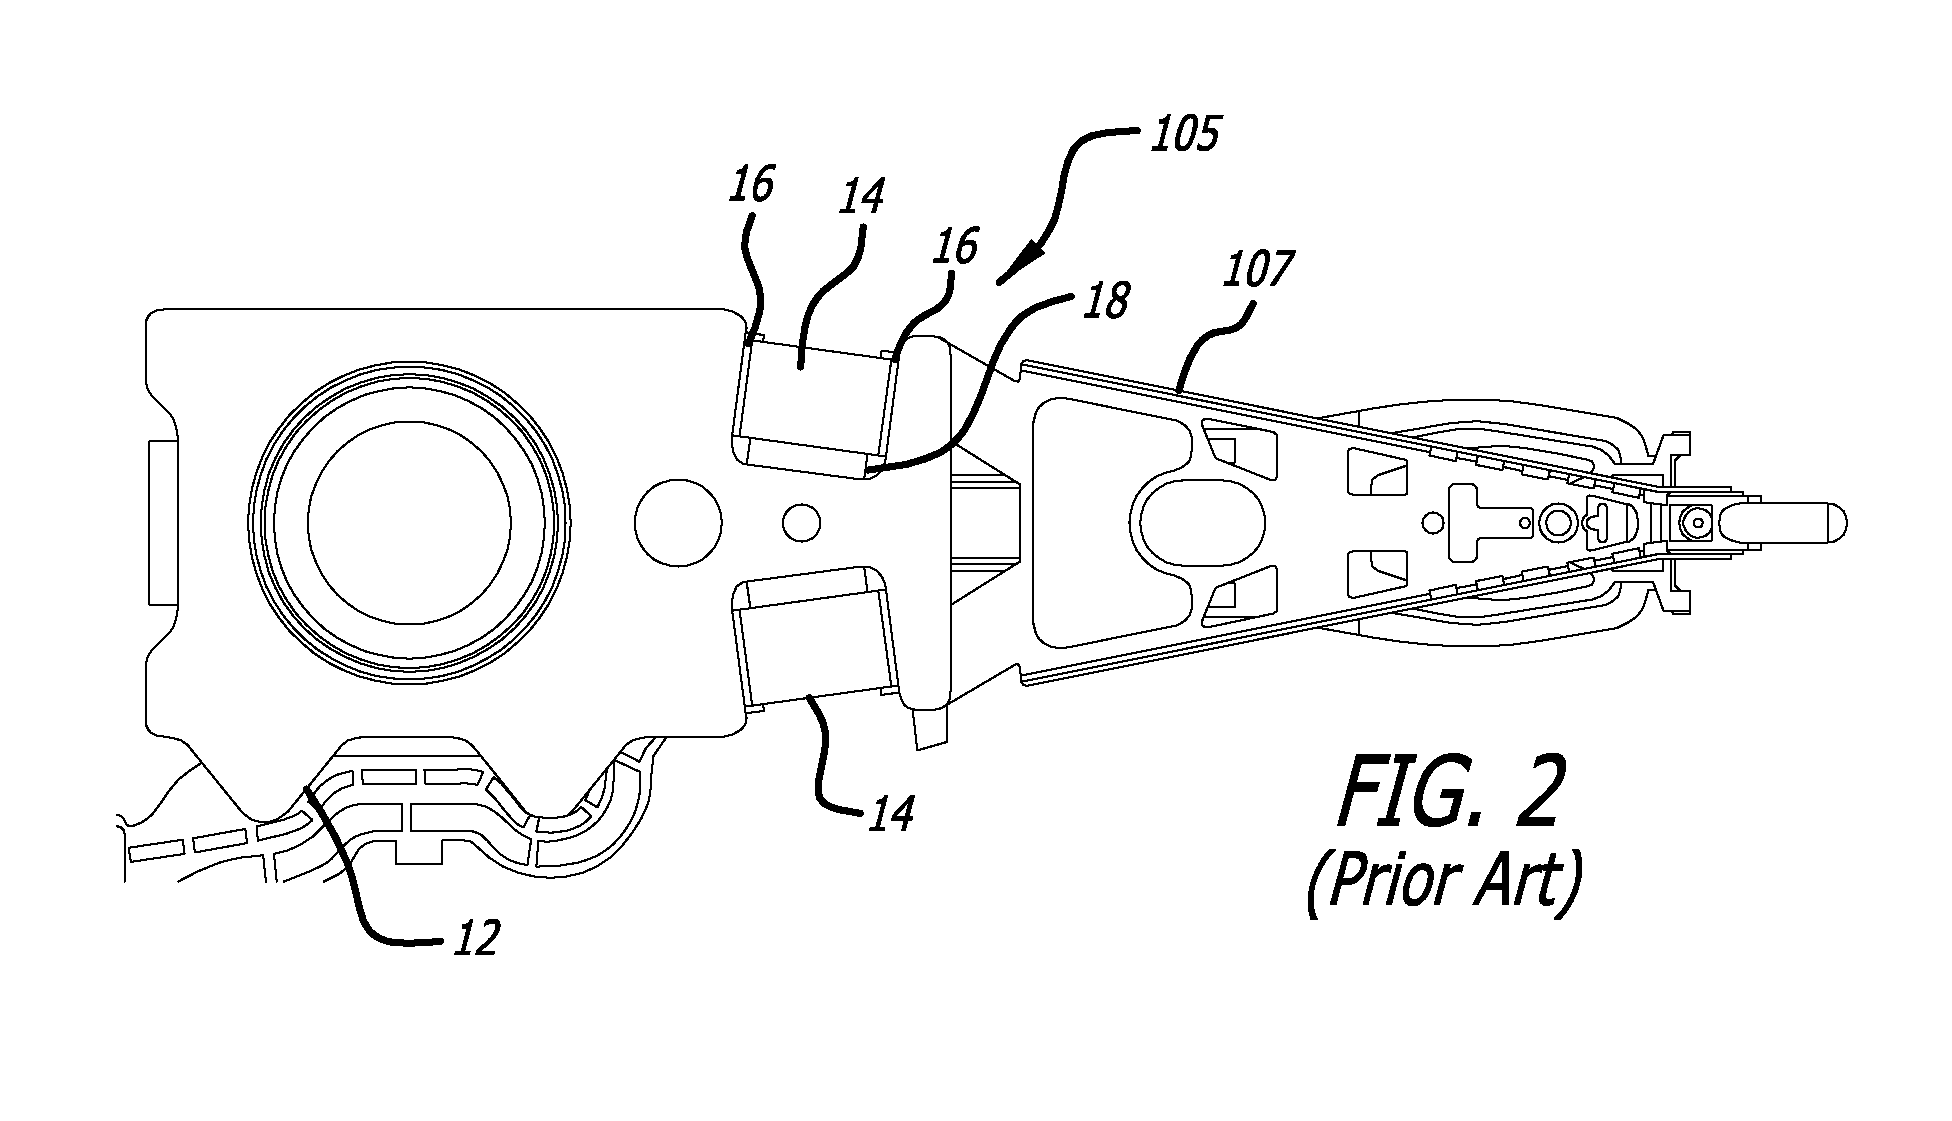 Hard drive suspension microactuator with restraining layer for control of bending